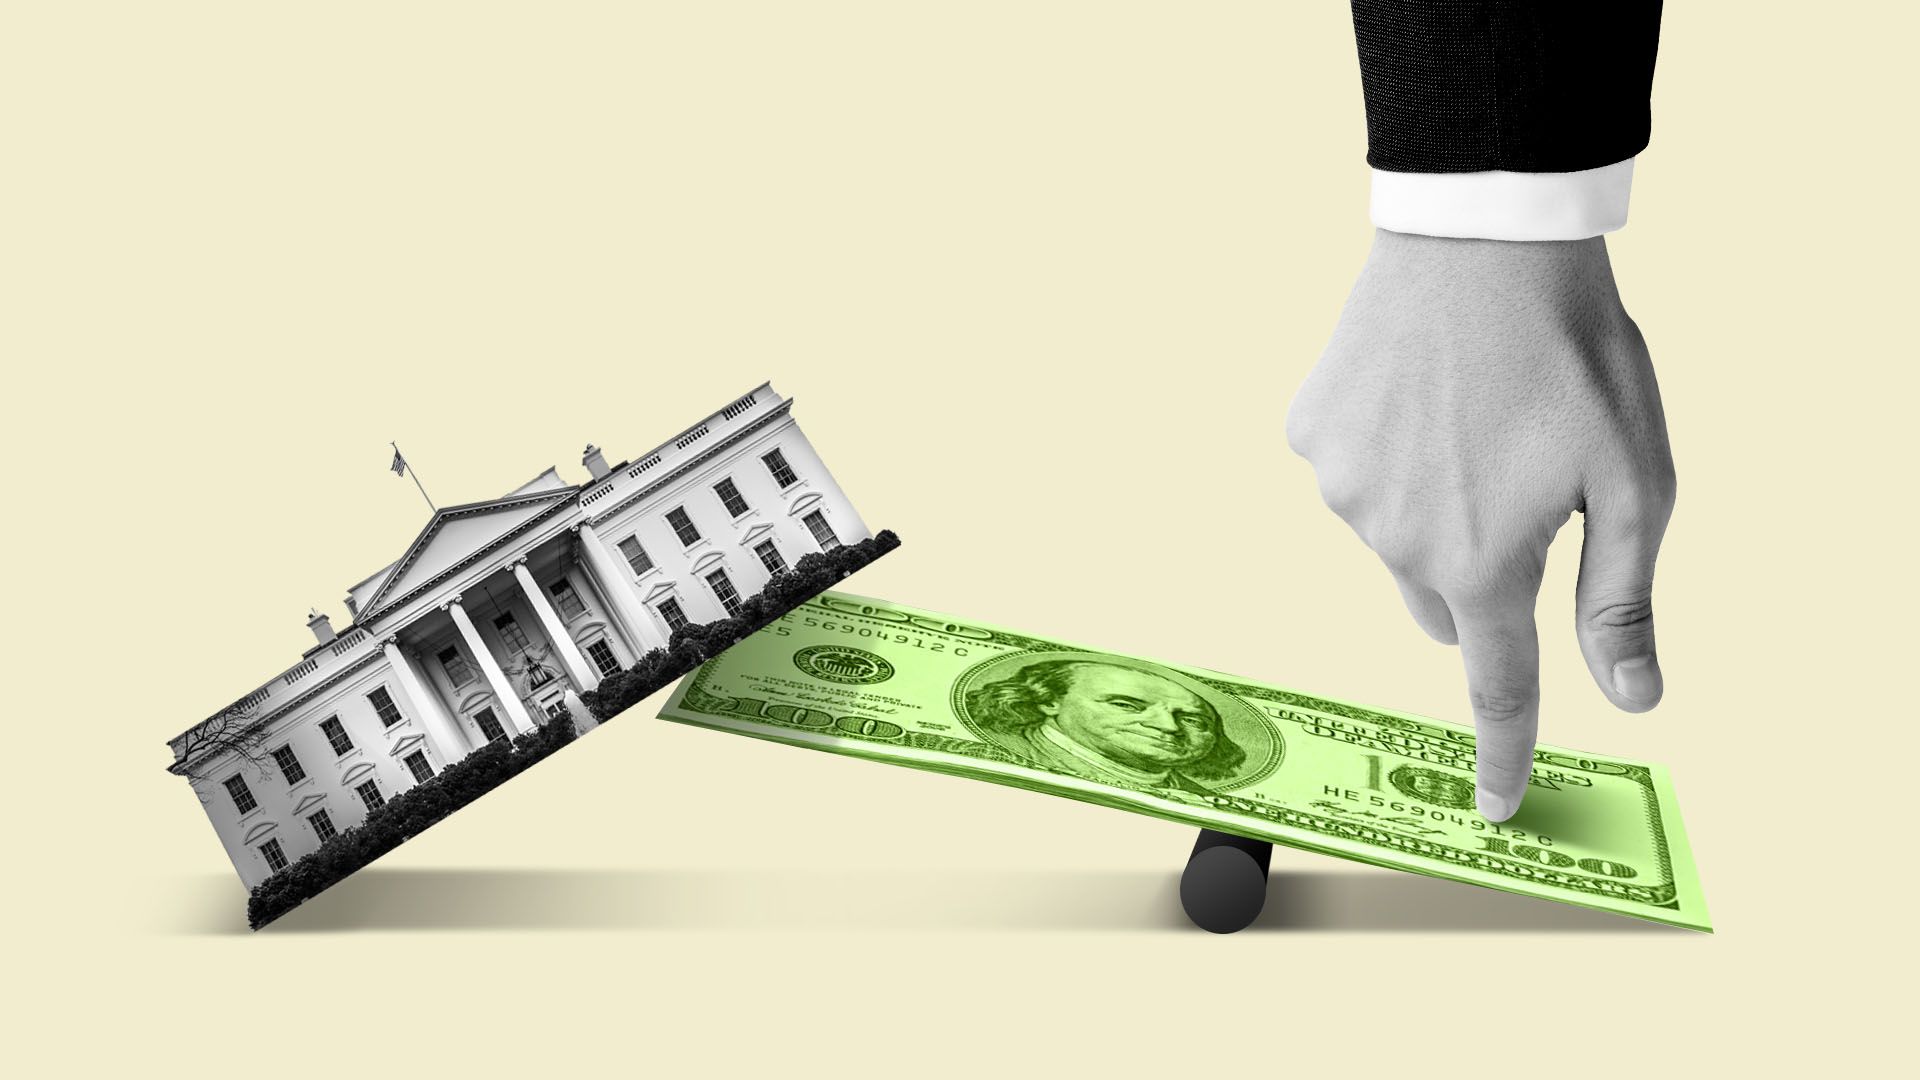 Illustration of a hand leveraging a stack of bills to look under the White House.